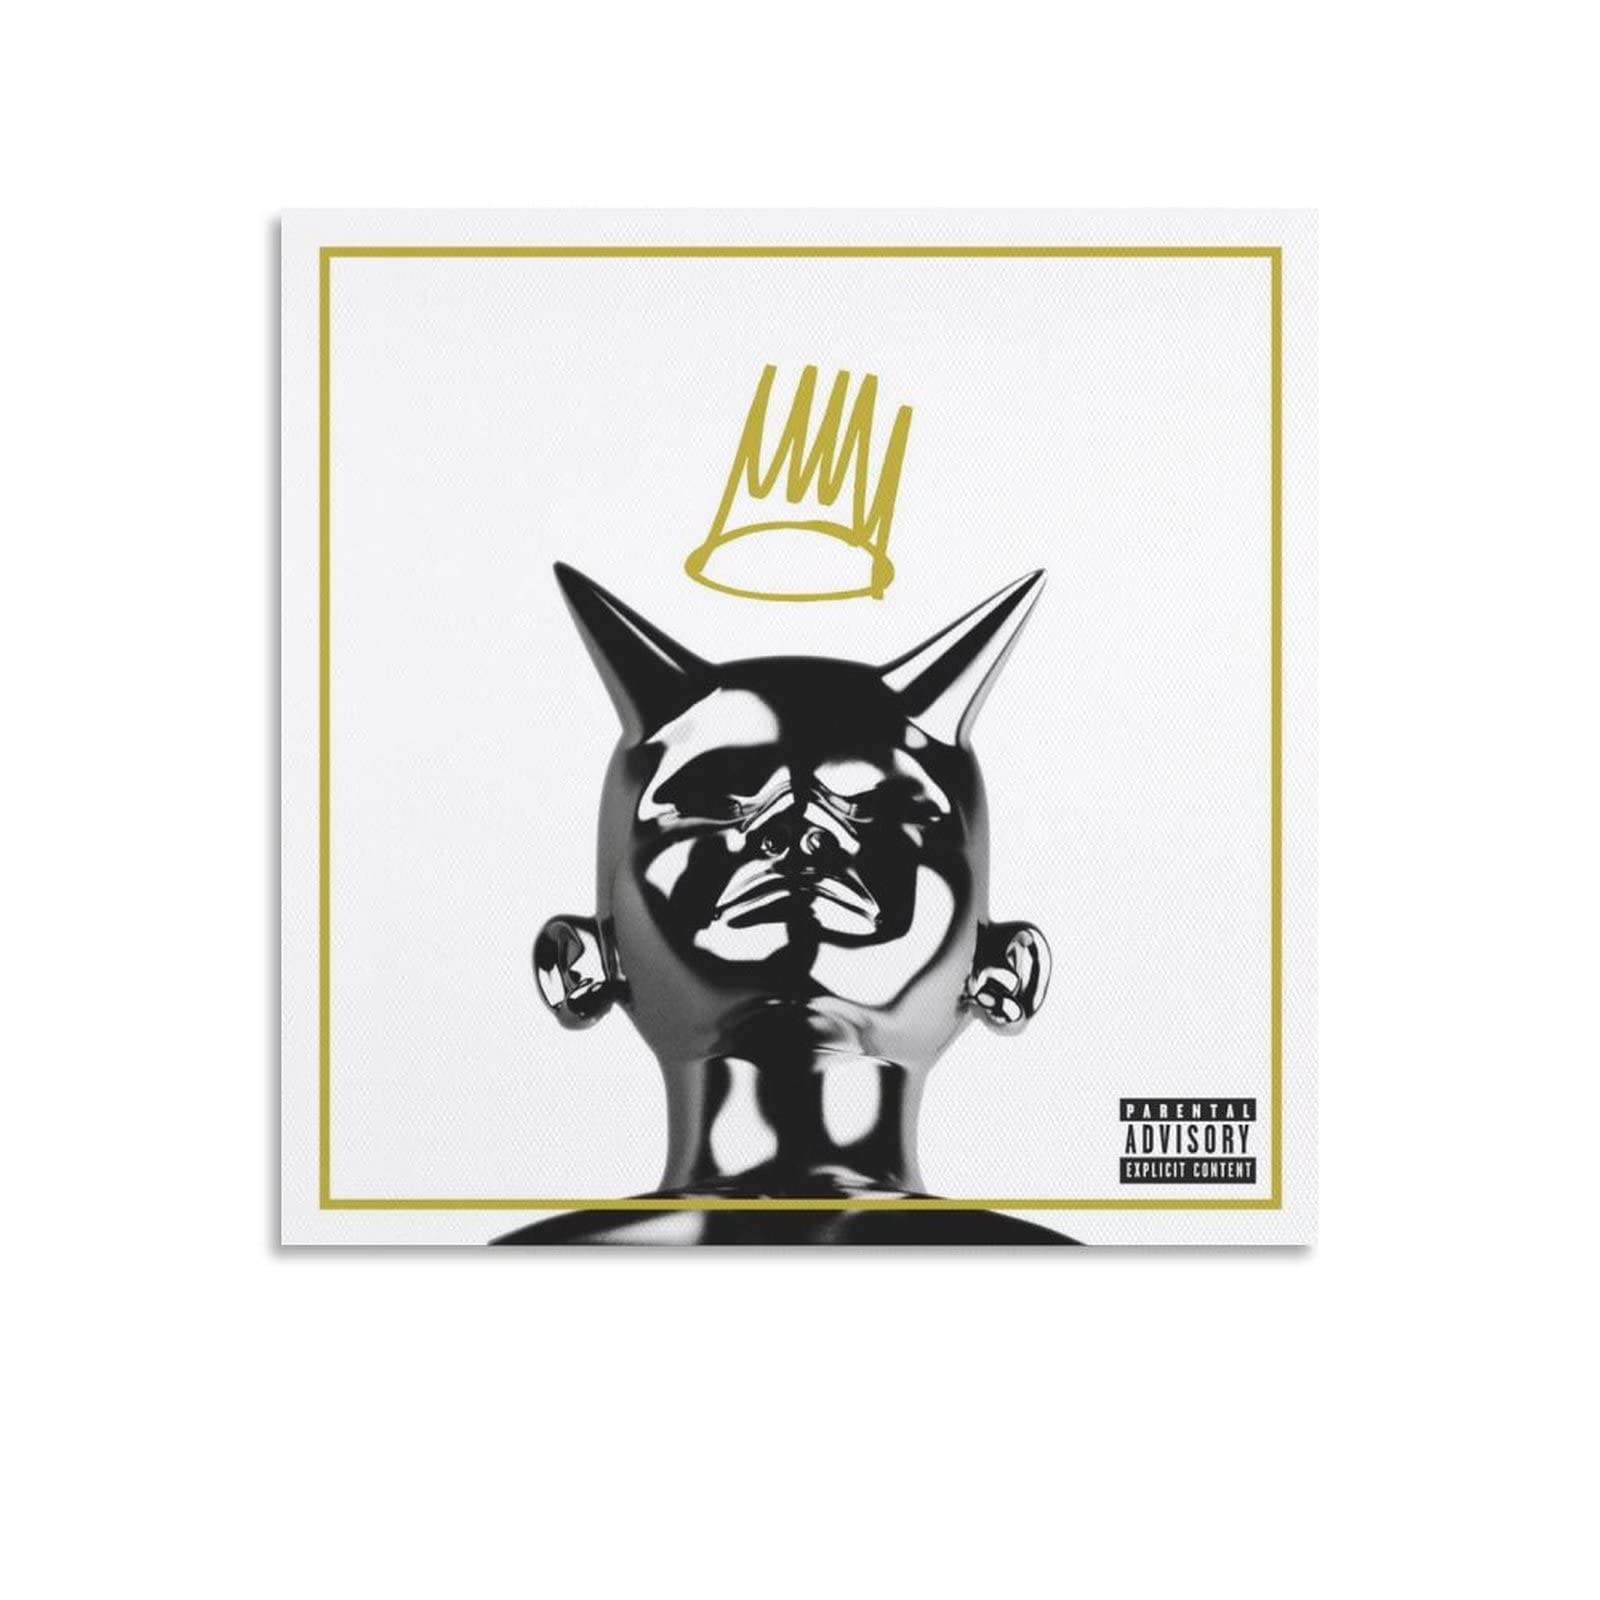 J. Cole - Louis Vuitton, Album cover by: kwamworks Song rel…